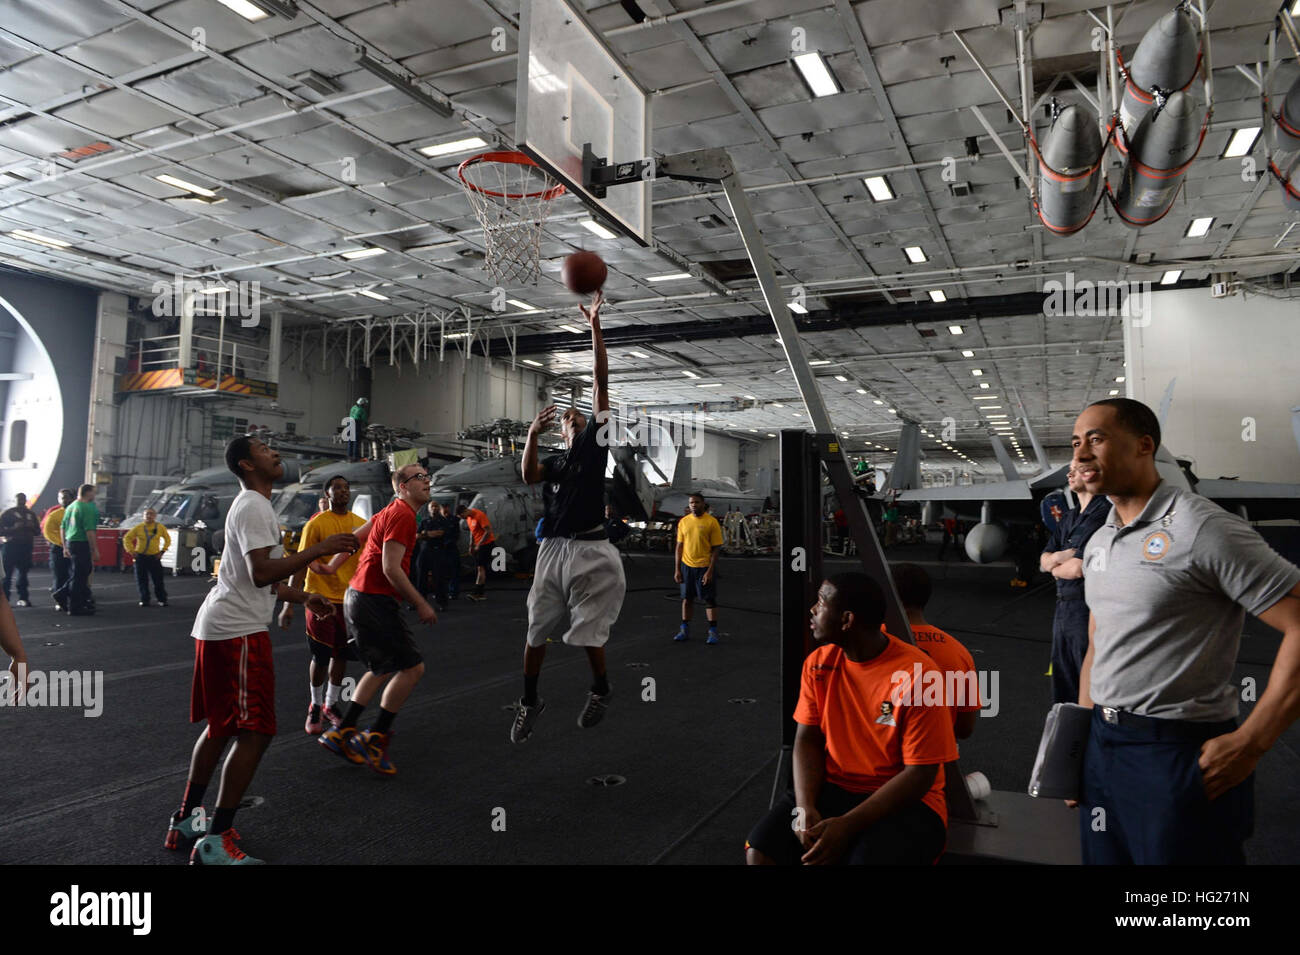 150503-N-ZF498-586 U.S. 5TH FLEET AREA OF OPERATIONS (May 3, 2015) – Sailors participate in a basketball tournament in the hangar bay of the aircraft carrier USS Theodore Roosevelt (CVN 71). Theodore Roosevelt is deployed in the U.S. 5th Fleet area of operations supporting Operation Inherent Resolve, strike operations in Iraq and Syria as directed, maritime security operations and theater security cooperation efforts in the region. (U.S. Navy photo by Mass Communications Specialist 3rd Class Anthony N. Hilkowski) USS Theodore Roosevelt operations 150503-N-ZF498-586 Stock Photo